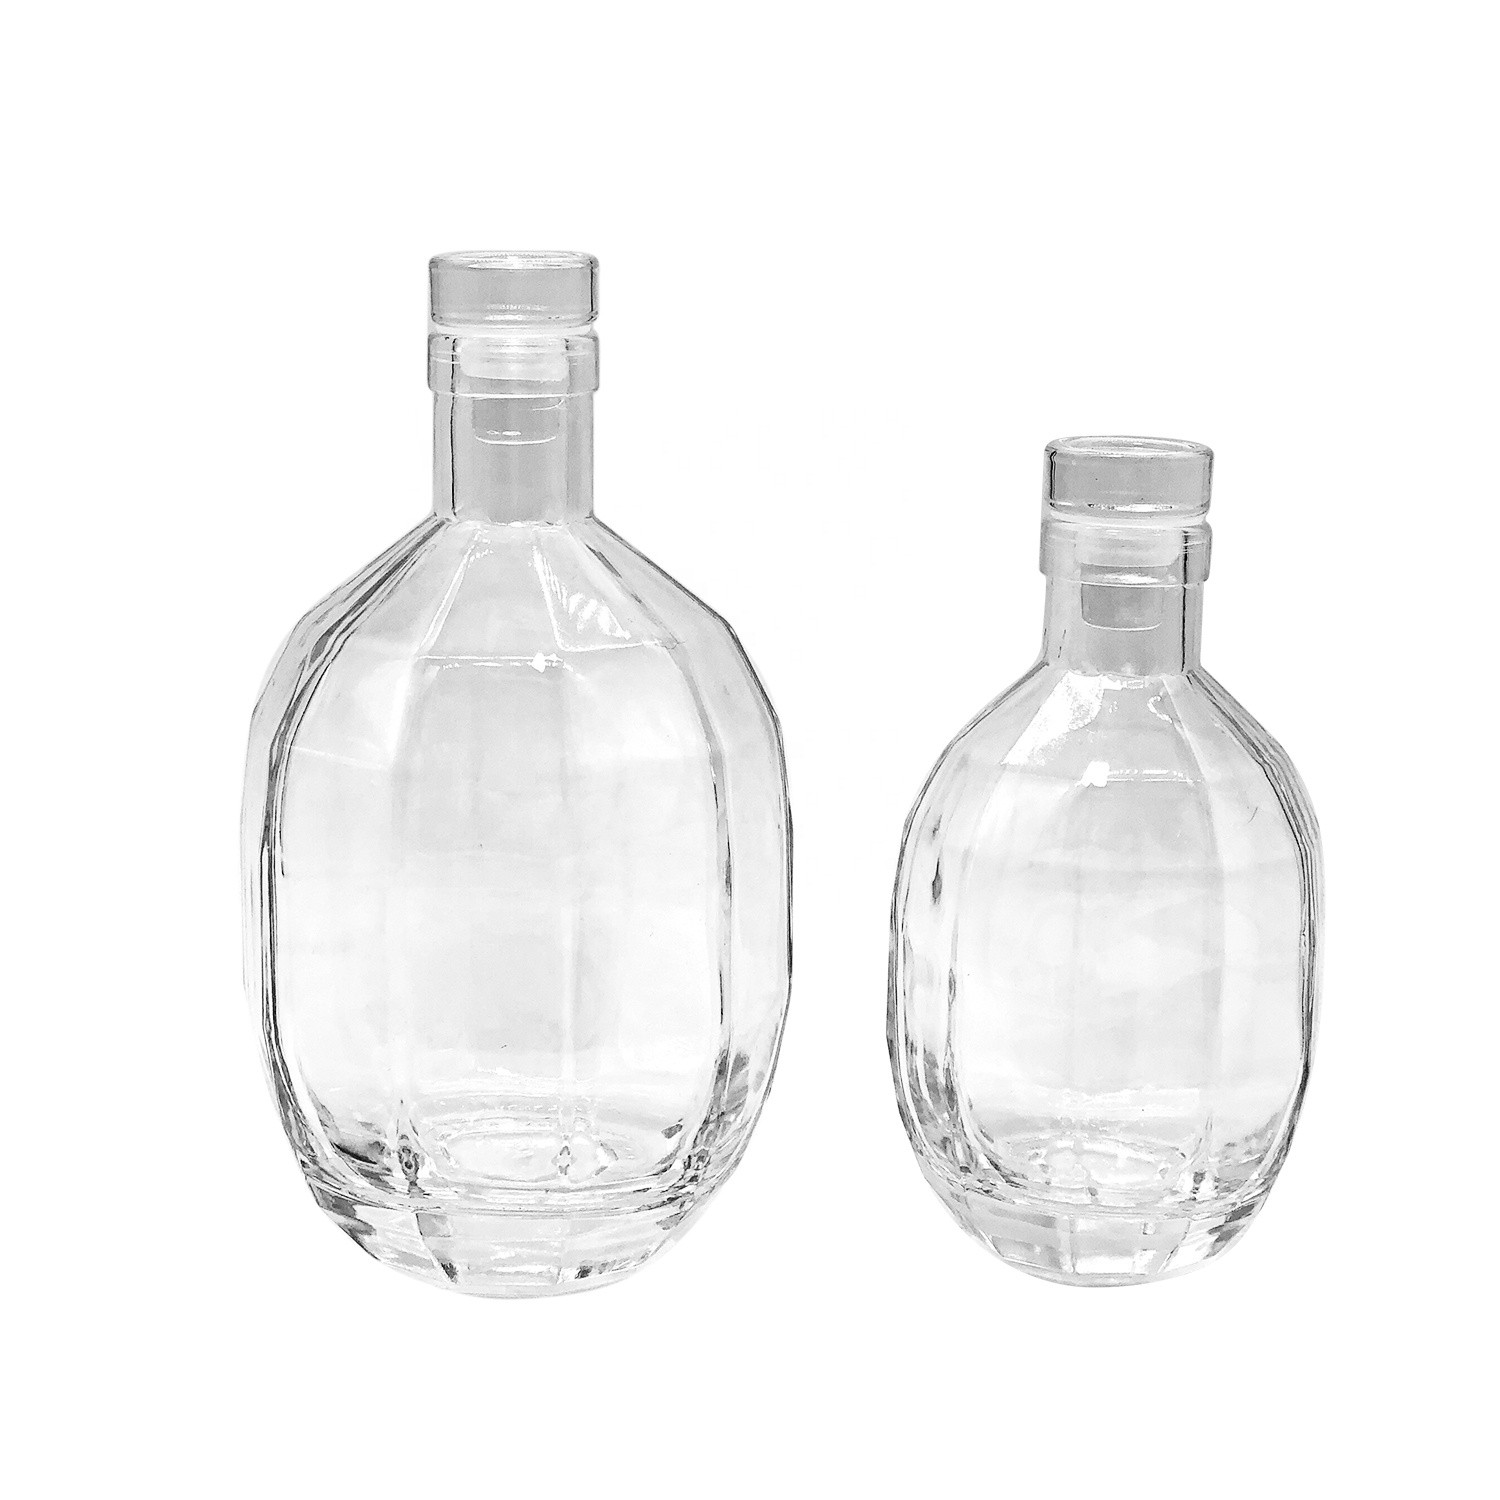 Good Quality Grenade Shaped Glass Juice Bottle with Glass Stopper Juice Tea with Milk Yangmei Cocktail Liquor Glass Bottle